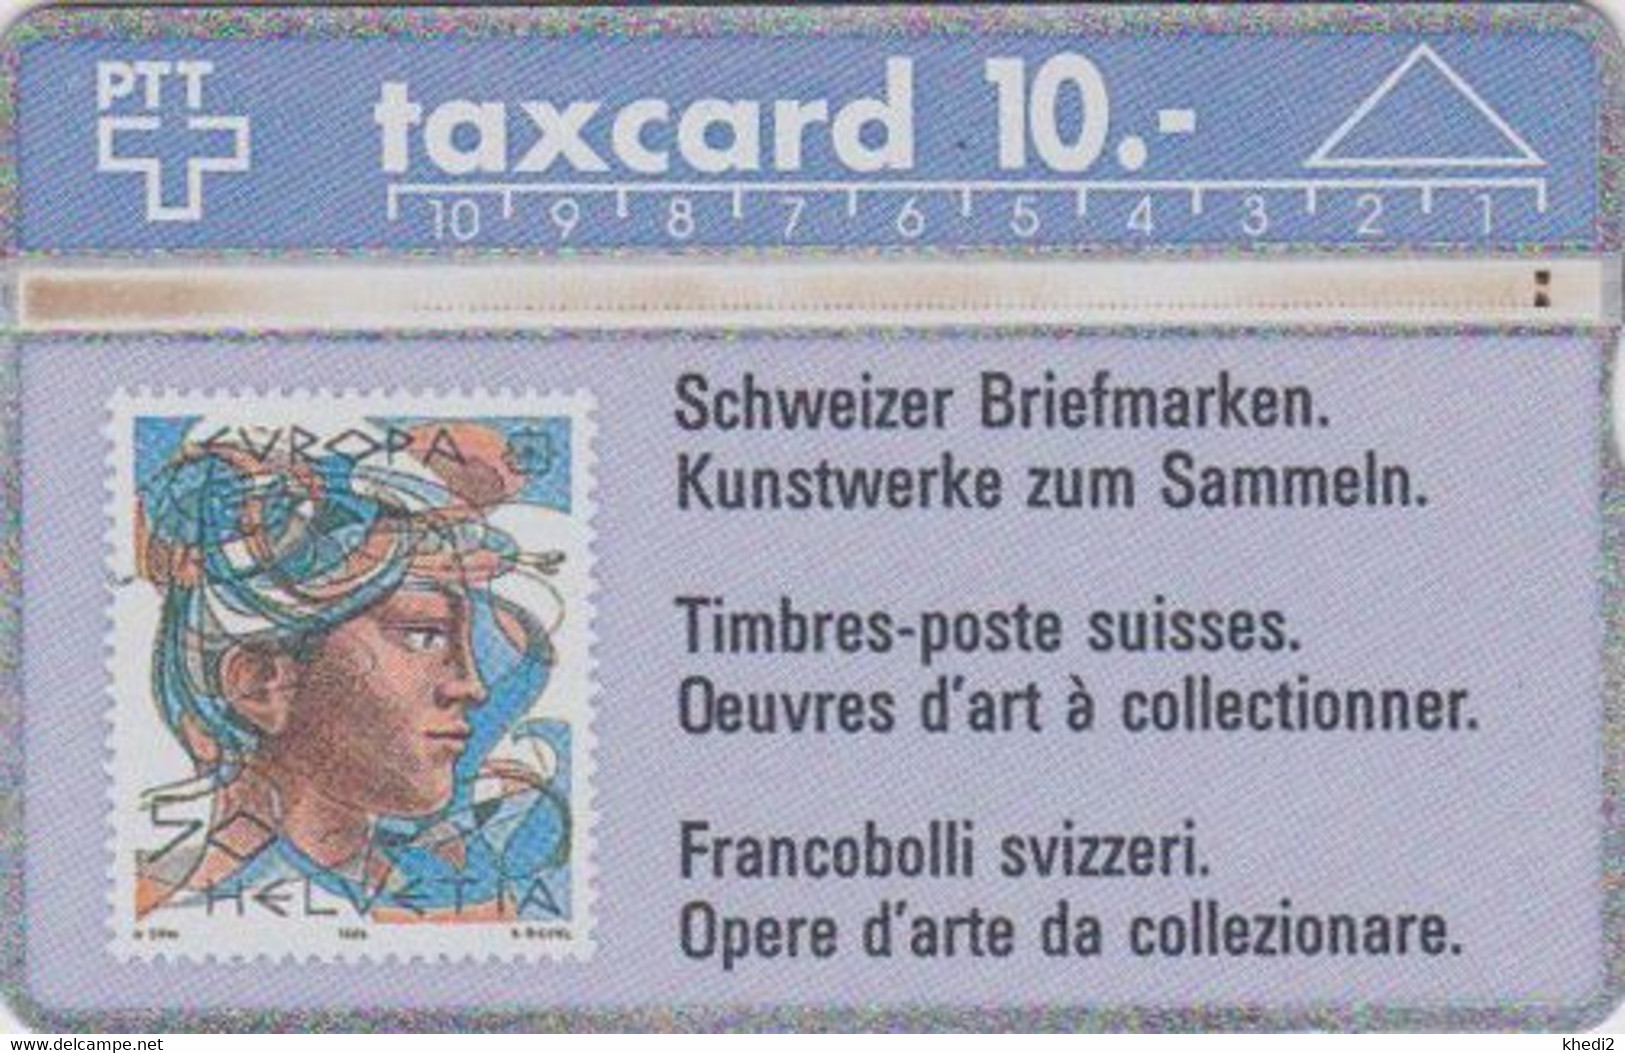 TC Magnétique L&G SUISSE - TIMBRE EUOPA PEINTURE Femme - STAMP With Woman On Phonecard SWITZERLAND - Card - 190 - Sellos & Monedas